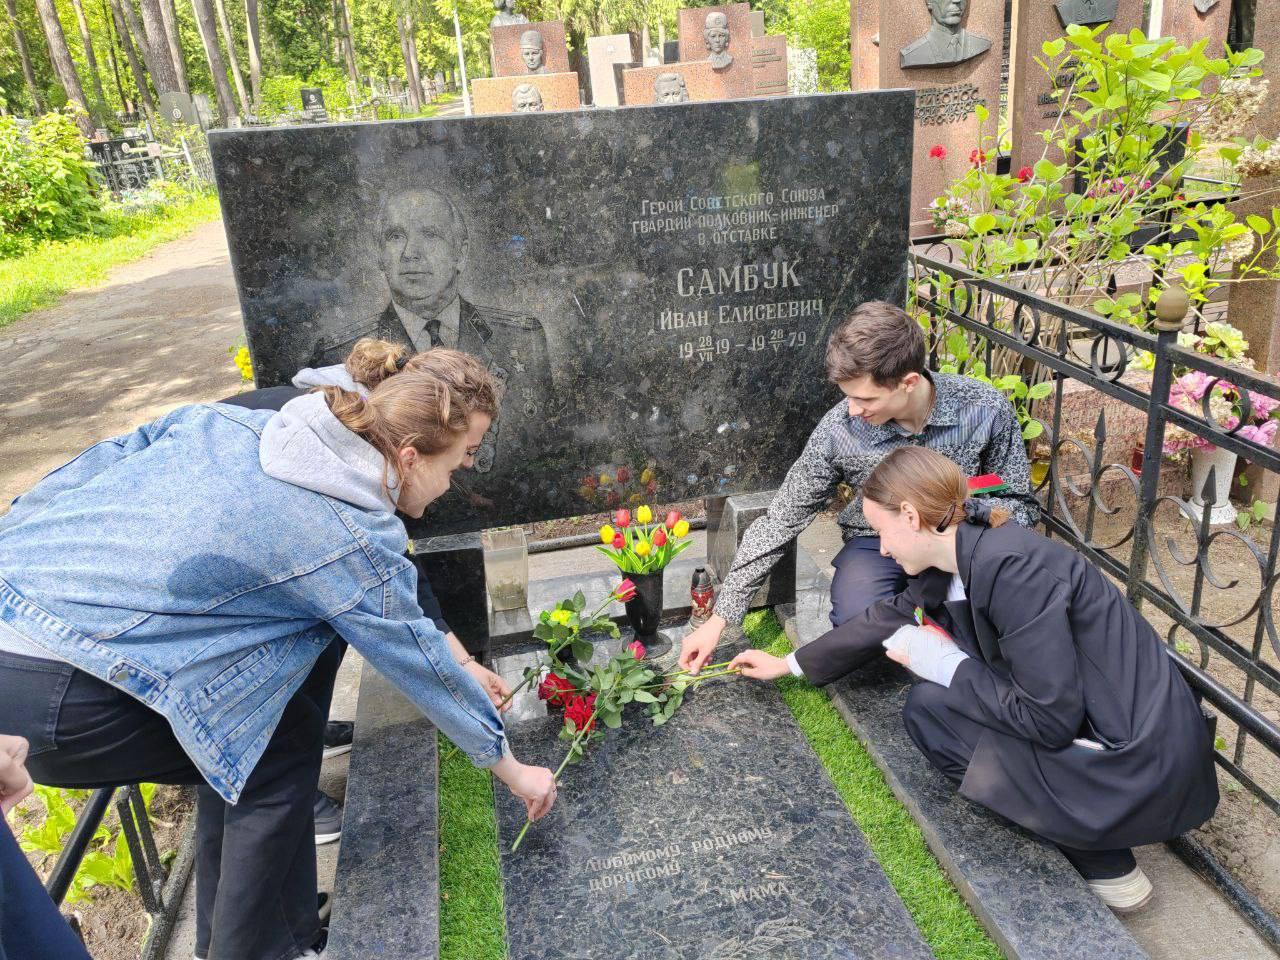 Laying flowers on the grave of Ivan Eliseevich Sambuka